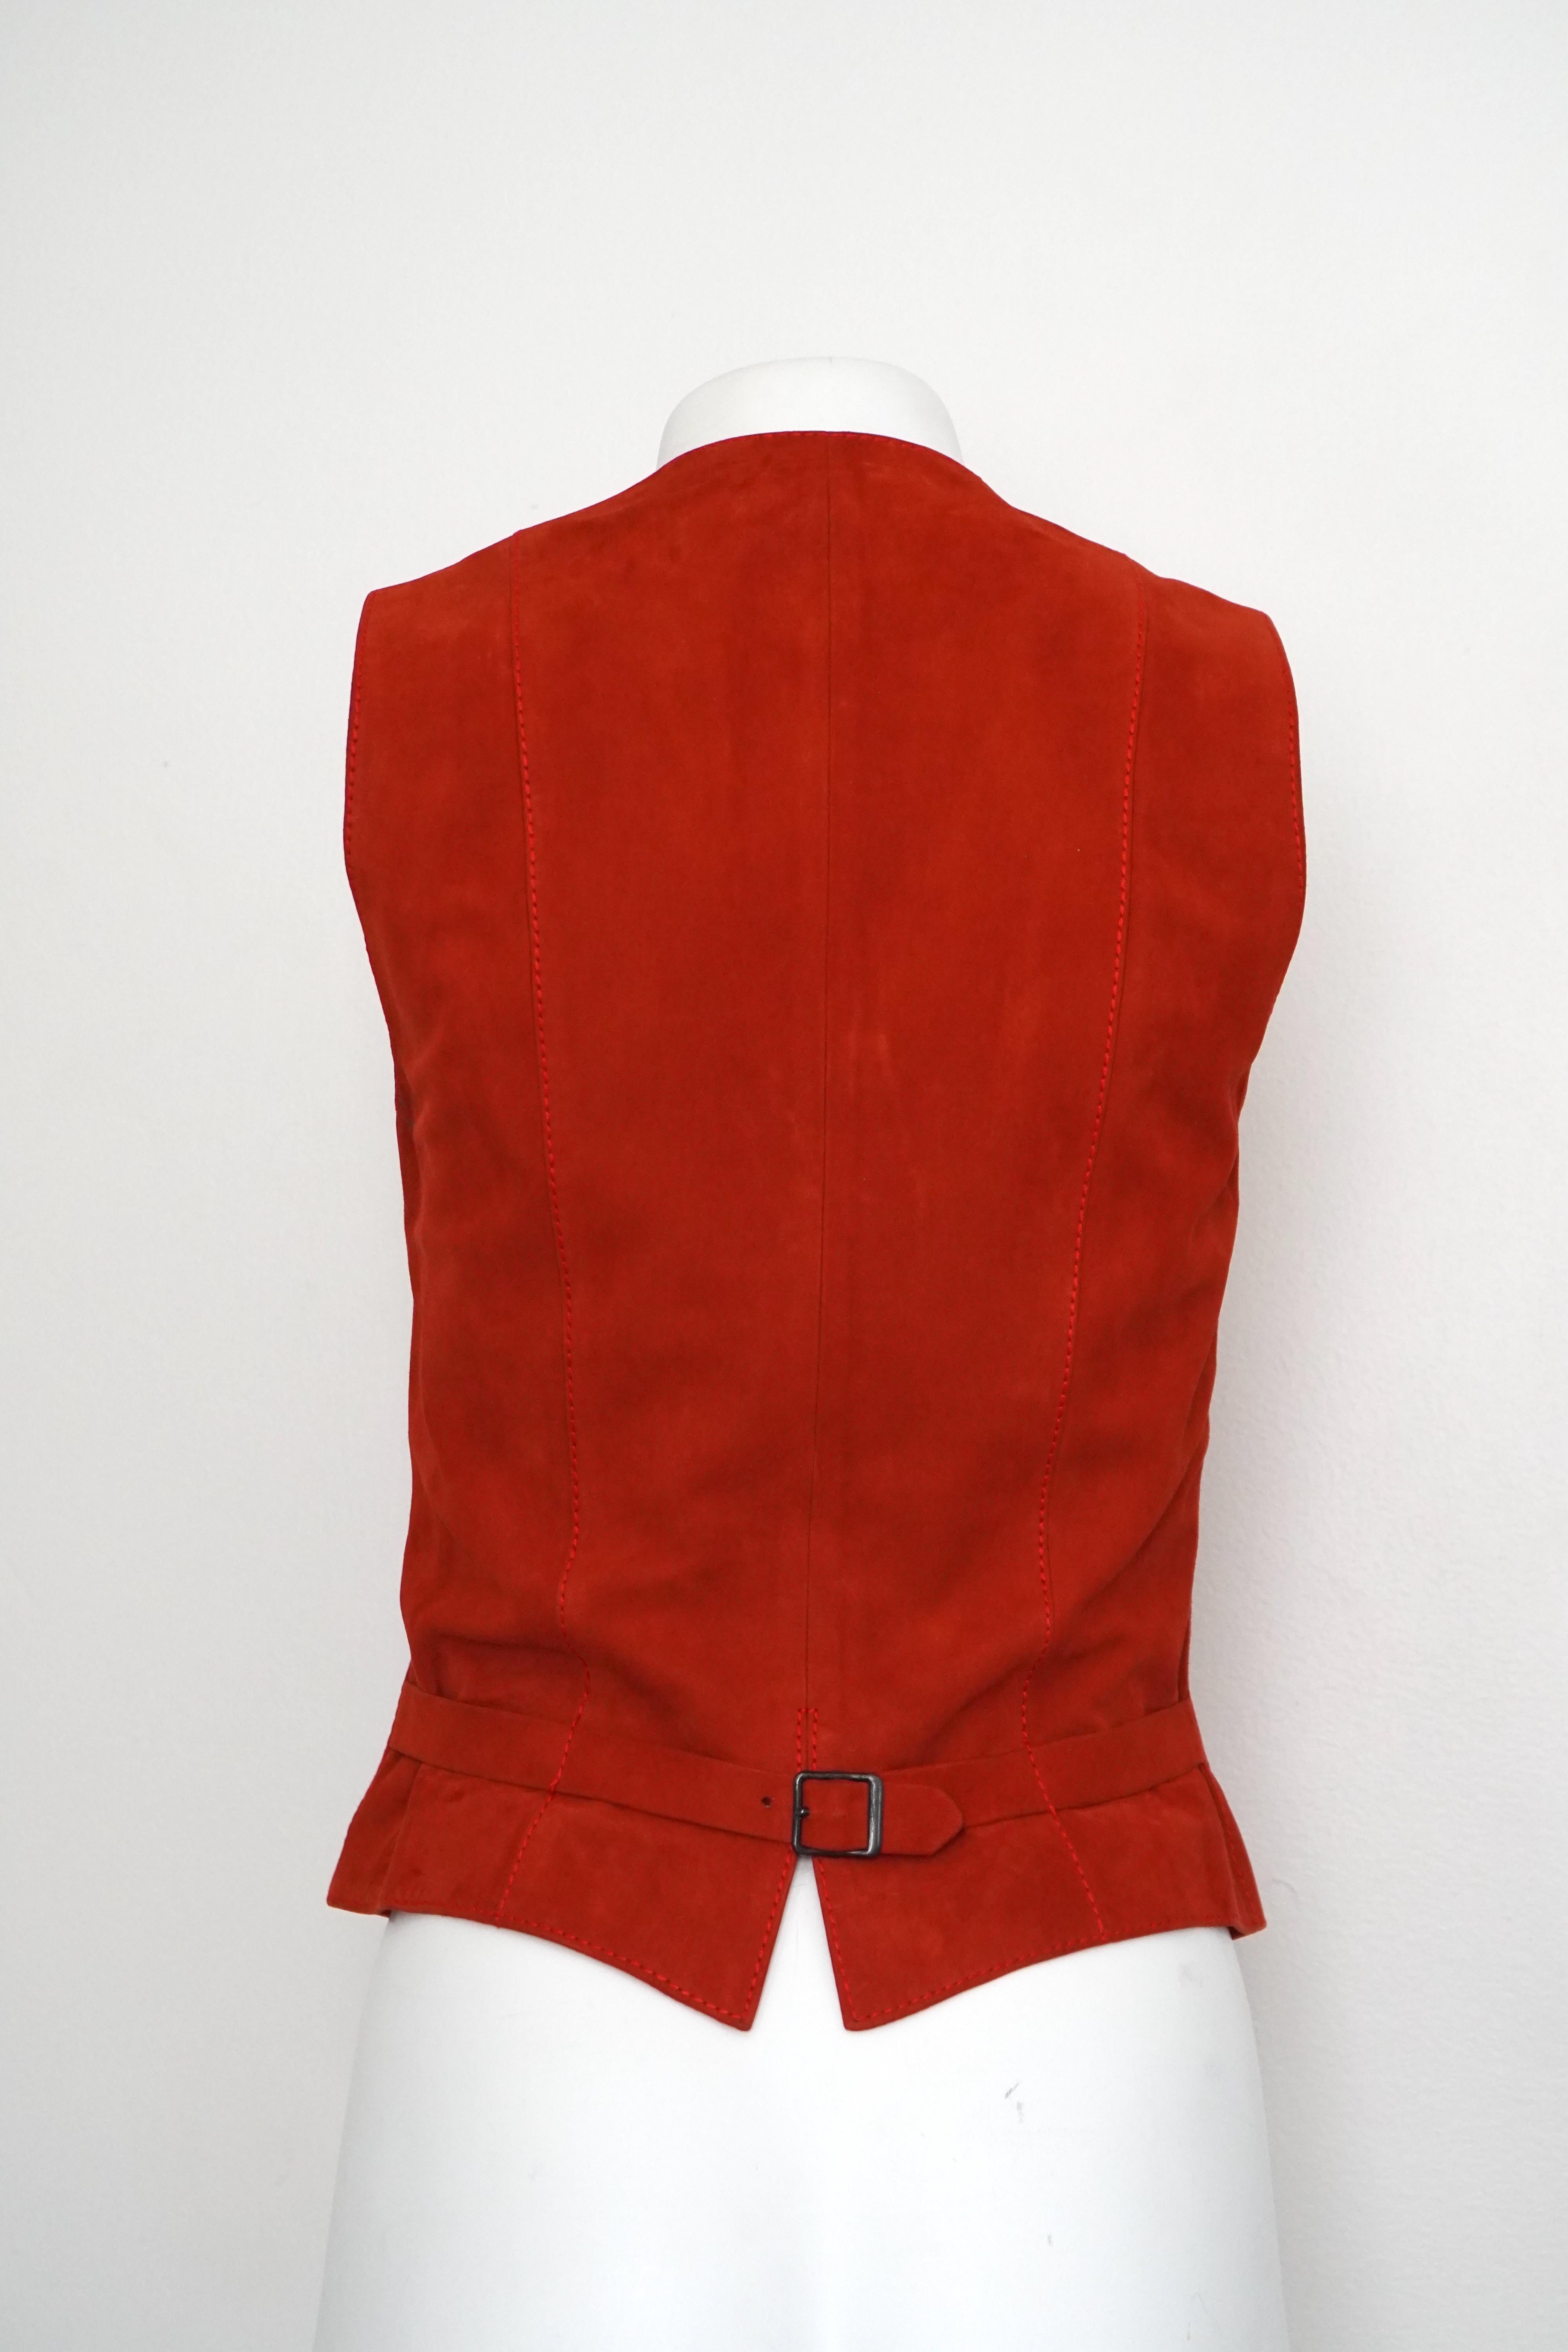 This beautiful Hermès Sport Suede Vest has a 5 button closure and has a belt adjustment in the back. We have it in a vibrant burnt orange color in size EU 40. Also it has two faux pockets in the front. This piece is still in great condition with